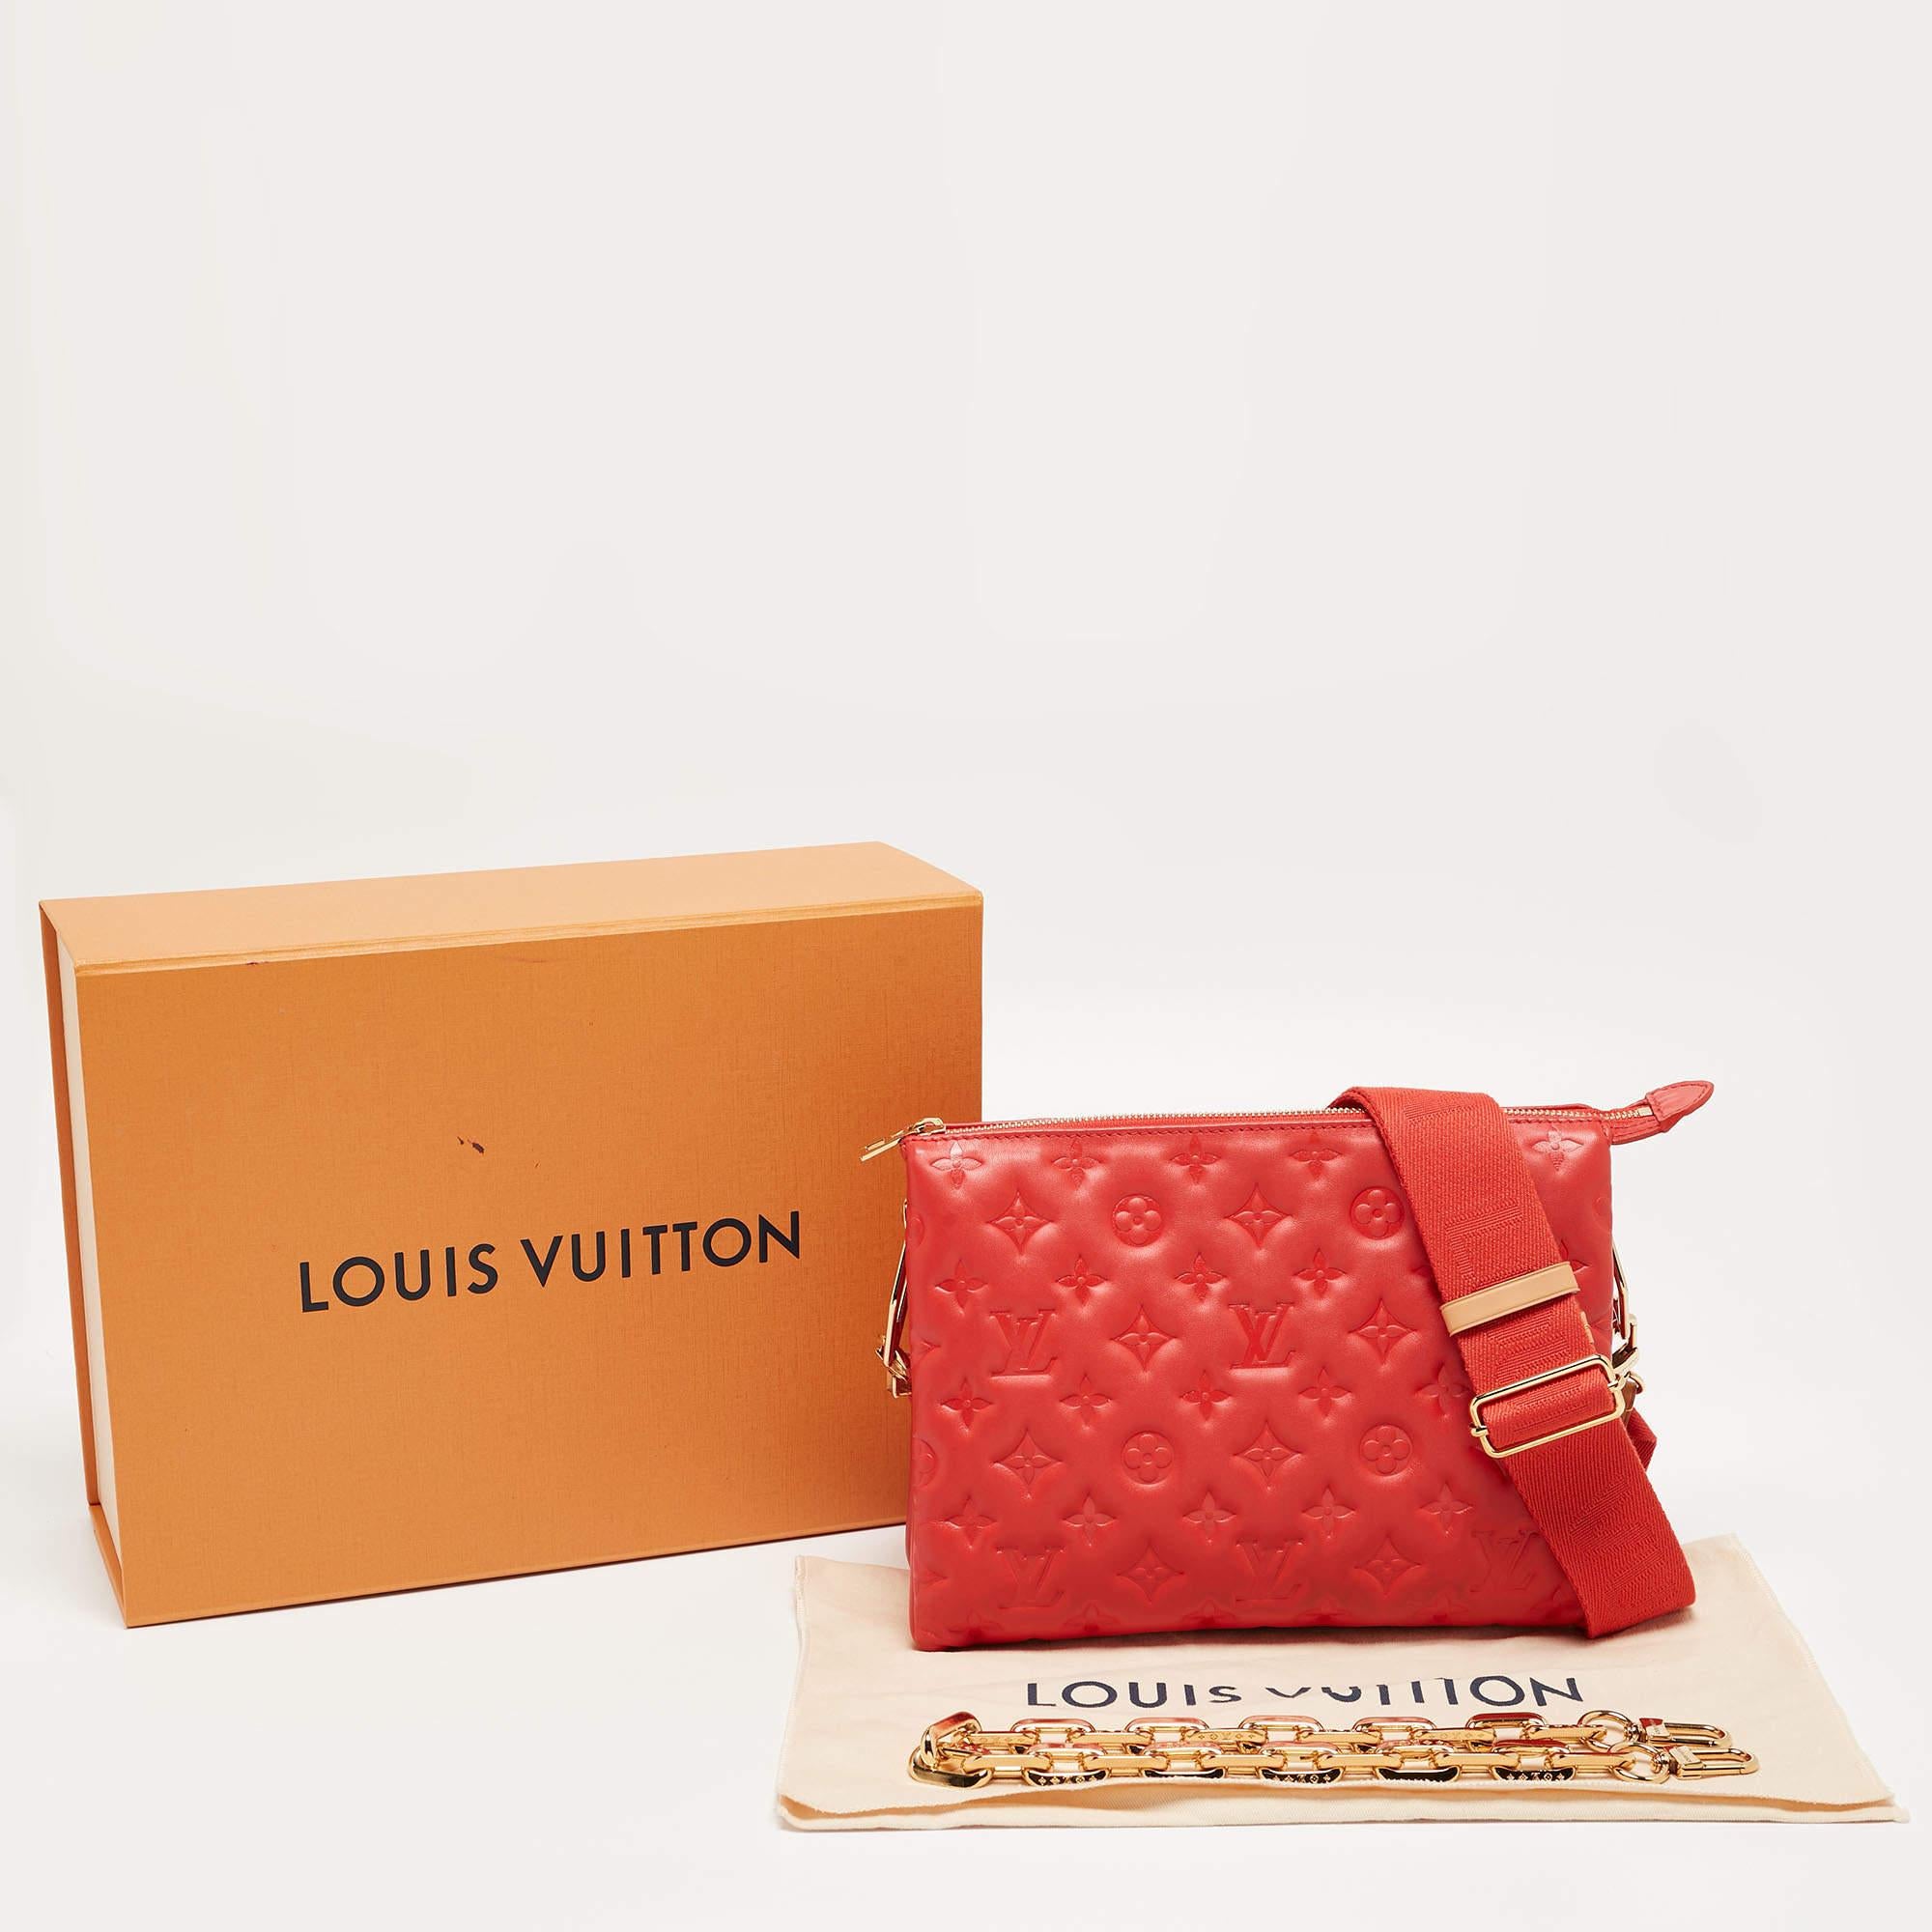 Louis Vuitton Wine Monogram Embossed Leather Coussin PM Bag For Sale 9